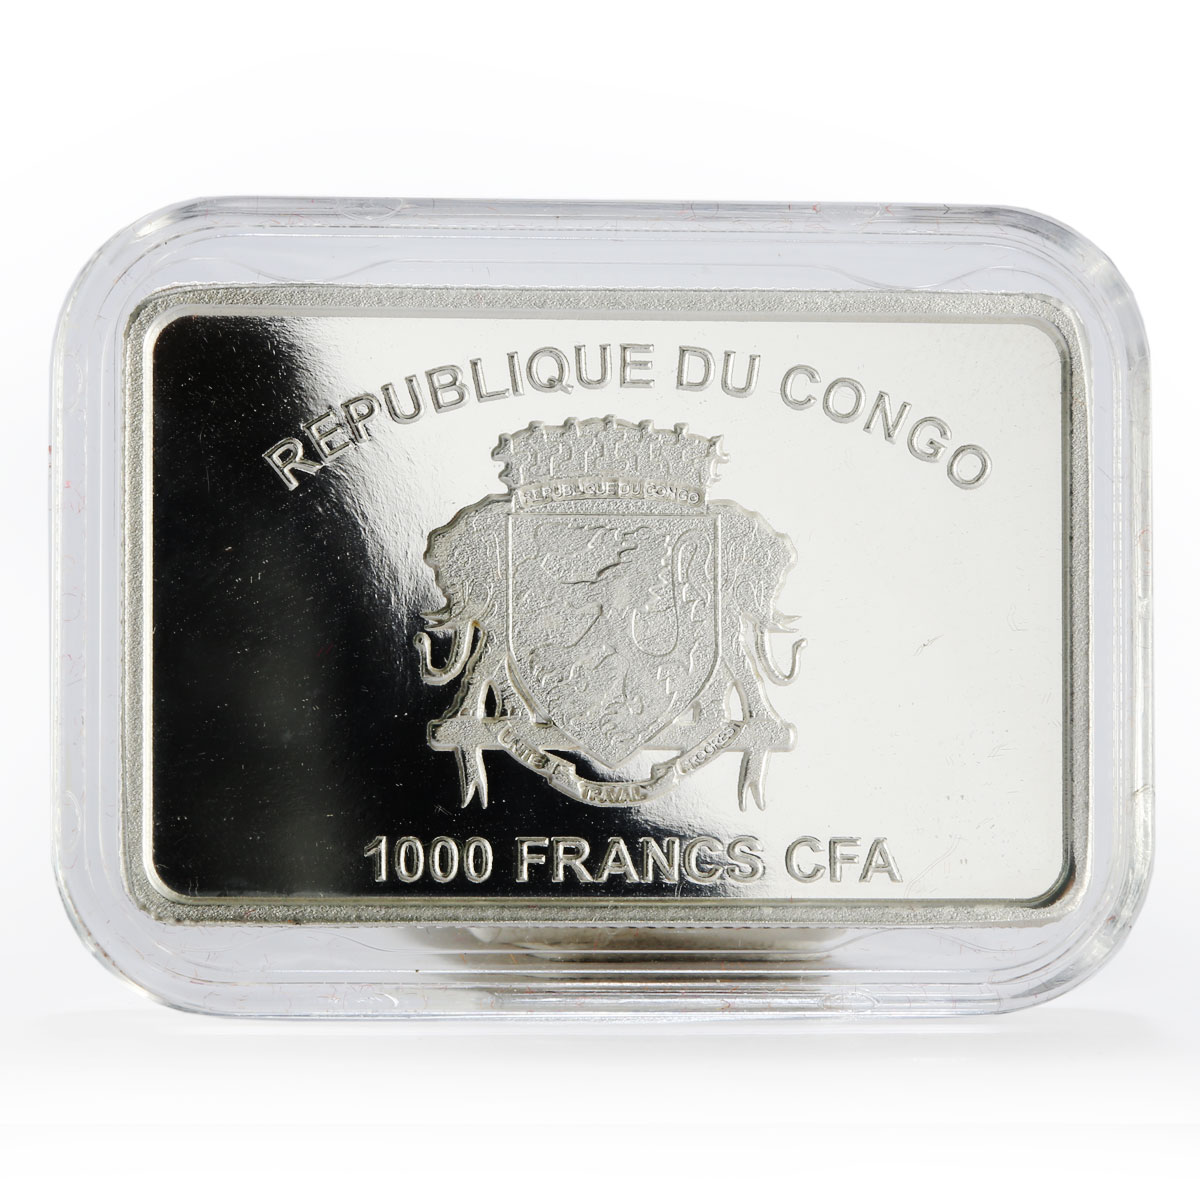 Congo 1000 francs Year of the Dog colored proof silver coin 2018